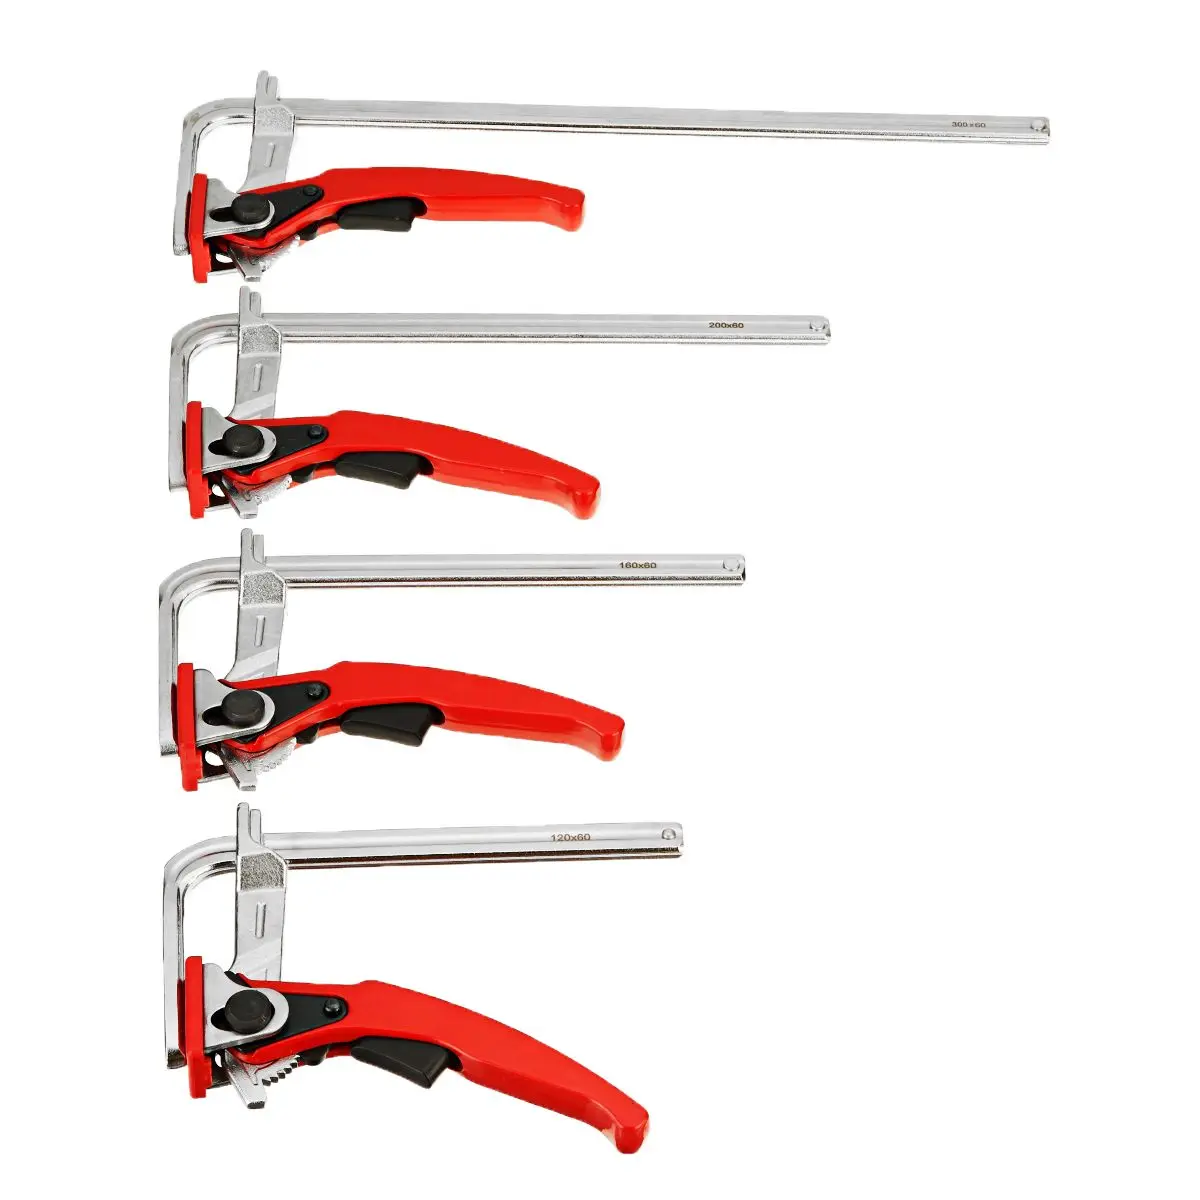 Quick Guide Rail Clamp Carpenter F Clamp Quick Clamping for MFT and Guide Rail System Hand Tool